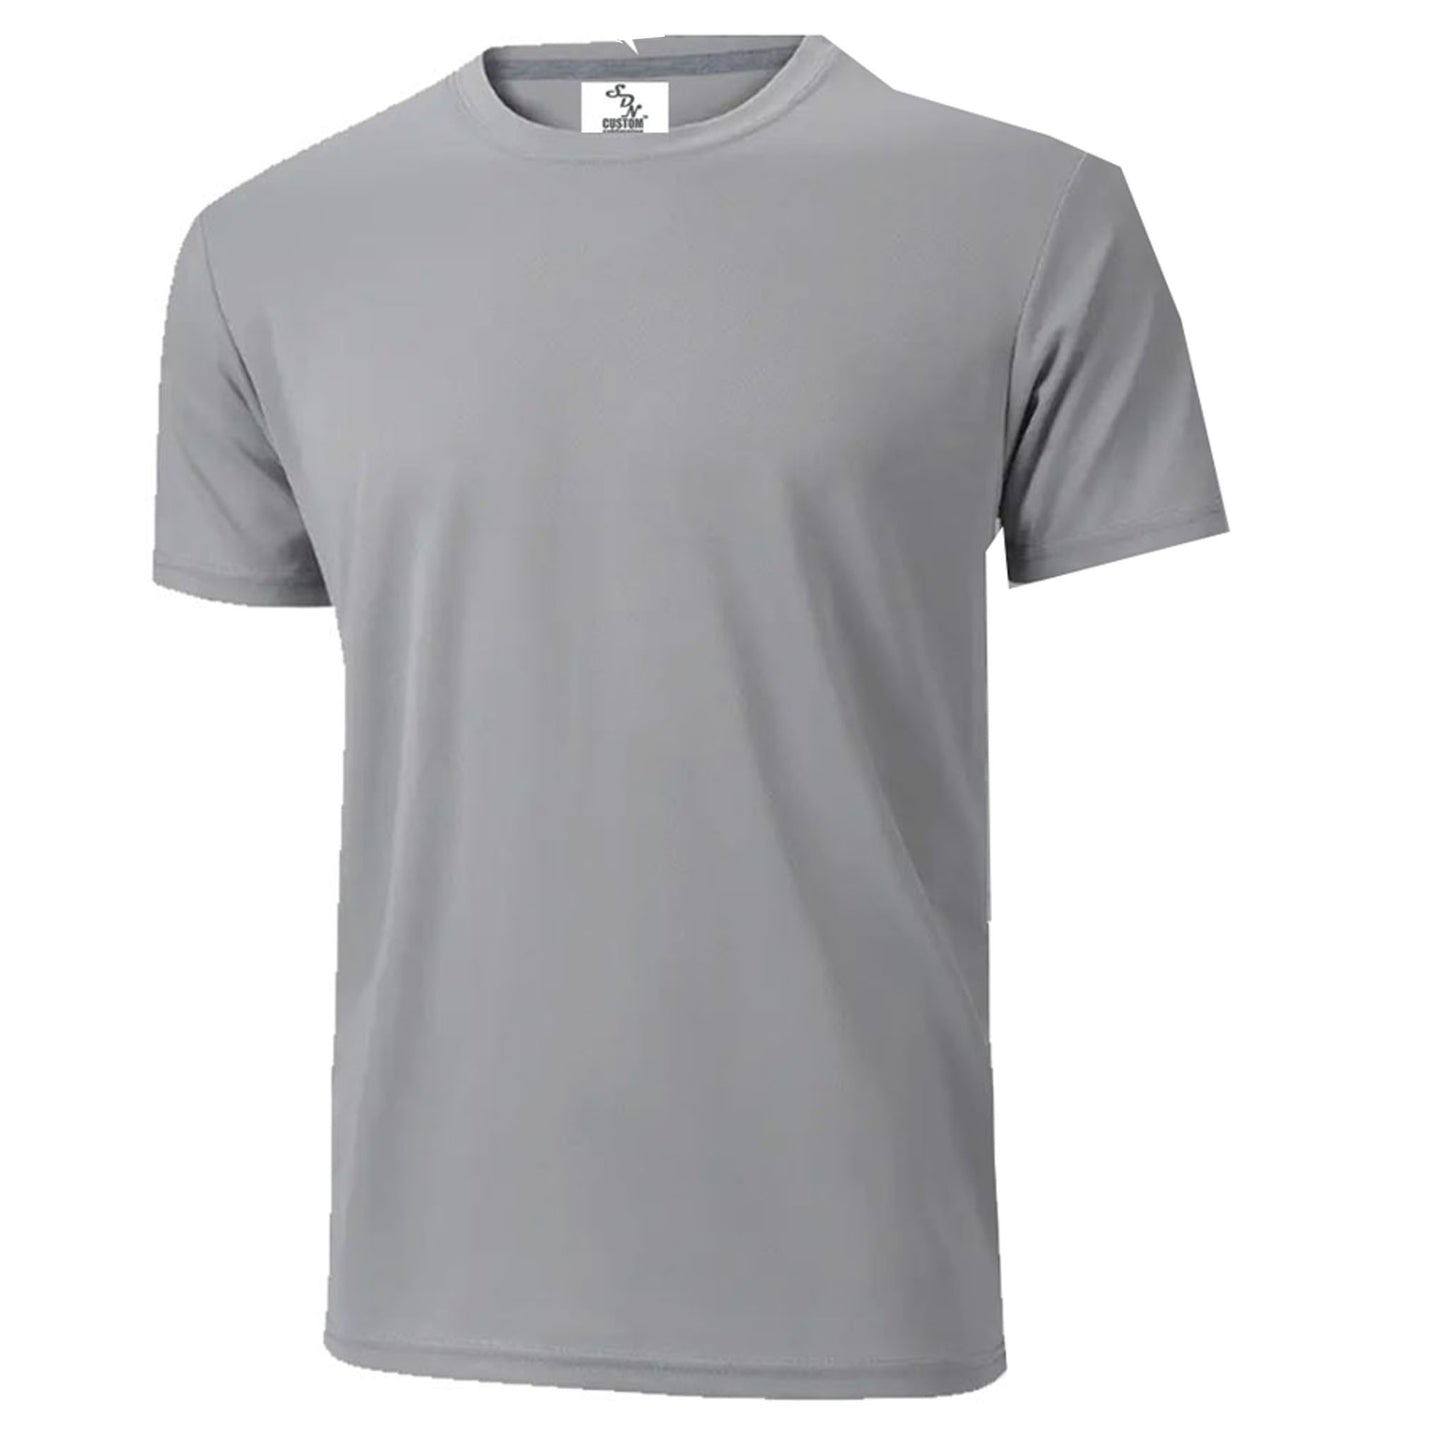 5 PACK-Athletics Adult Sublimation t-shirts grey  (95% Polyester-5% spandex) -